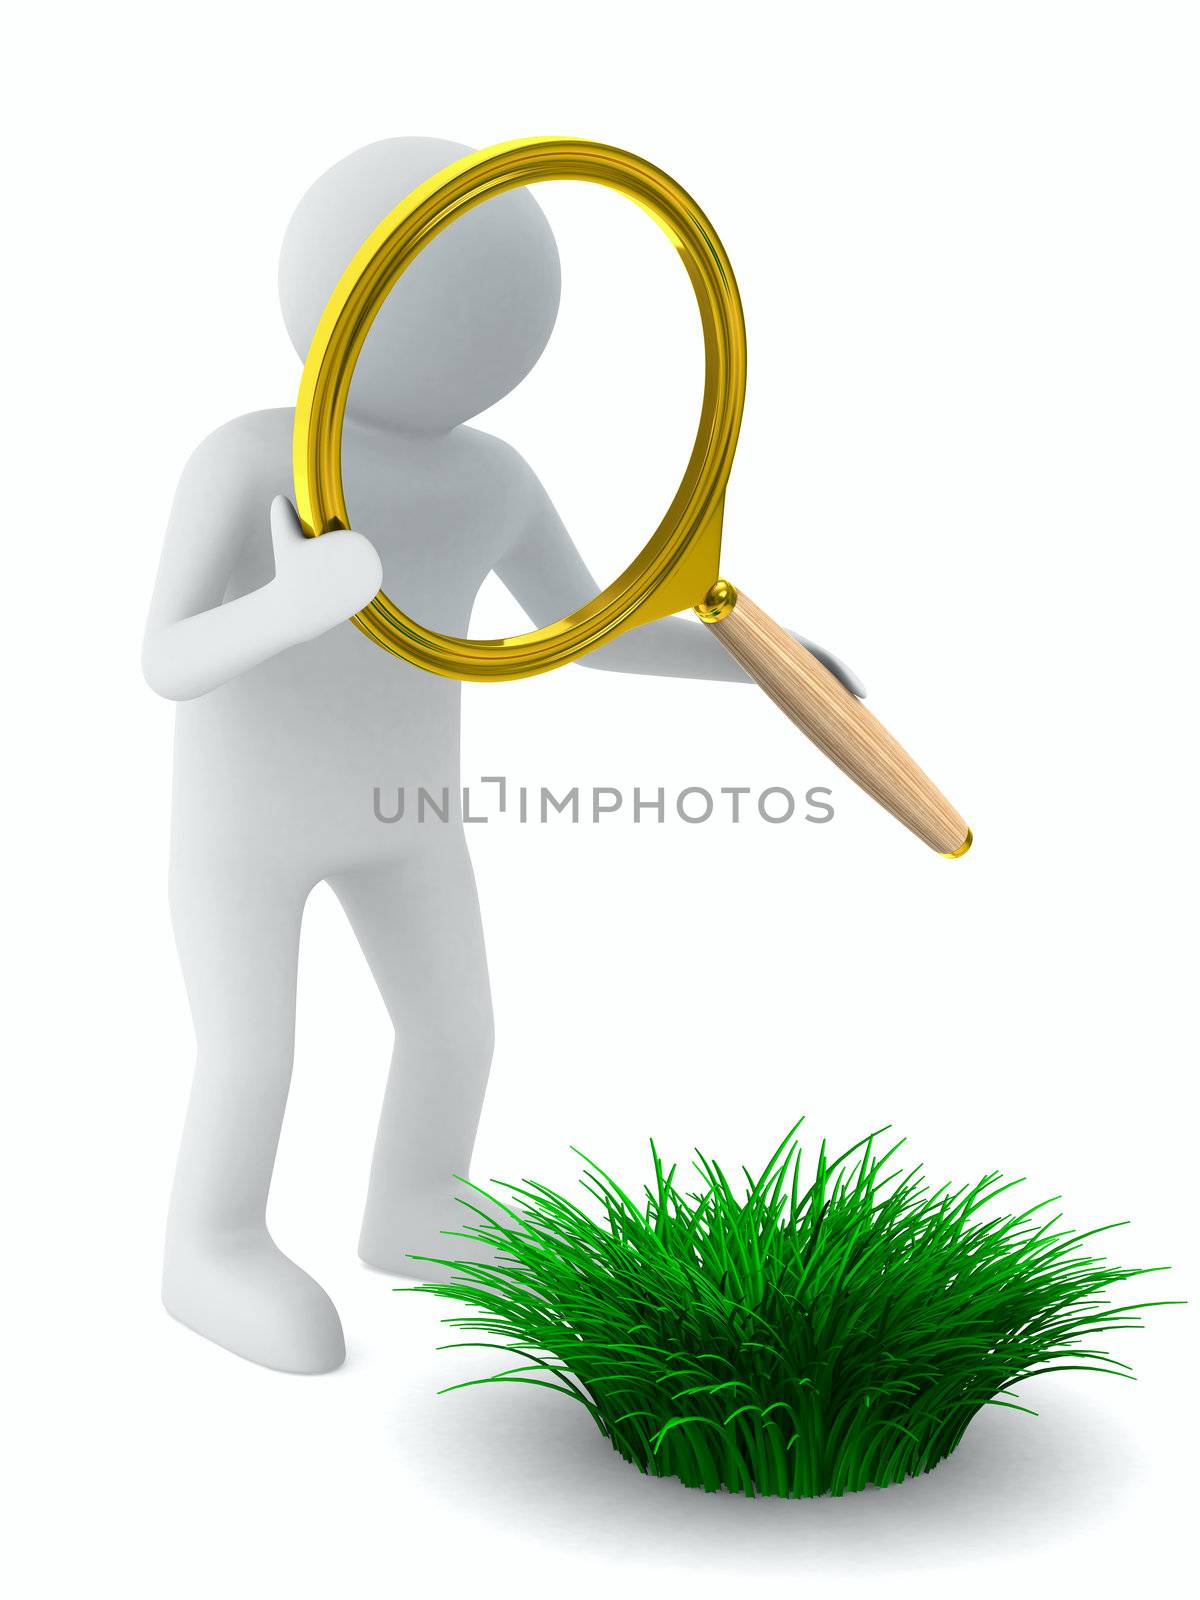 Man with magnifier and grass. Isolated 3D image